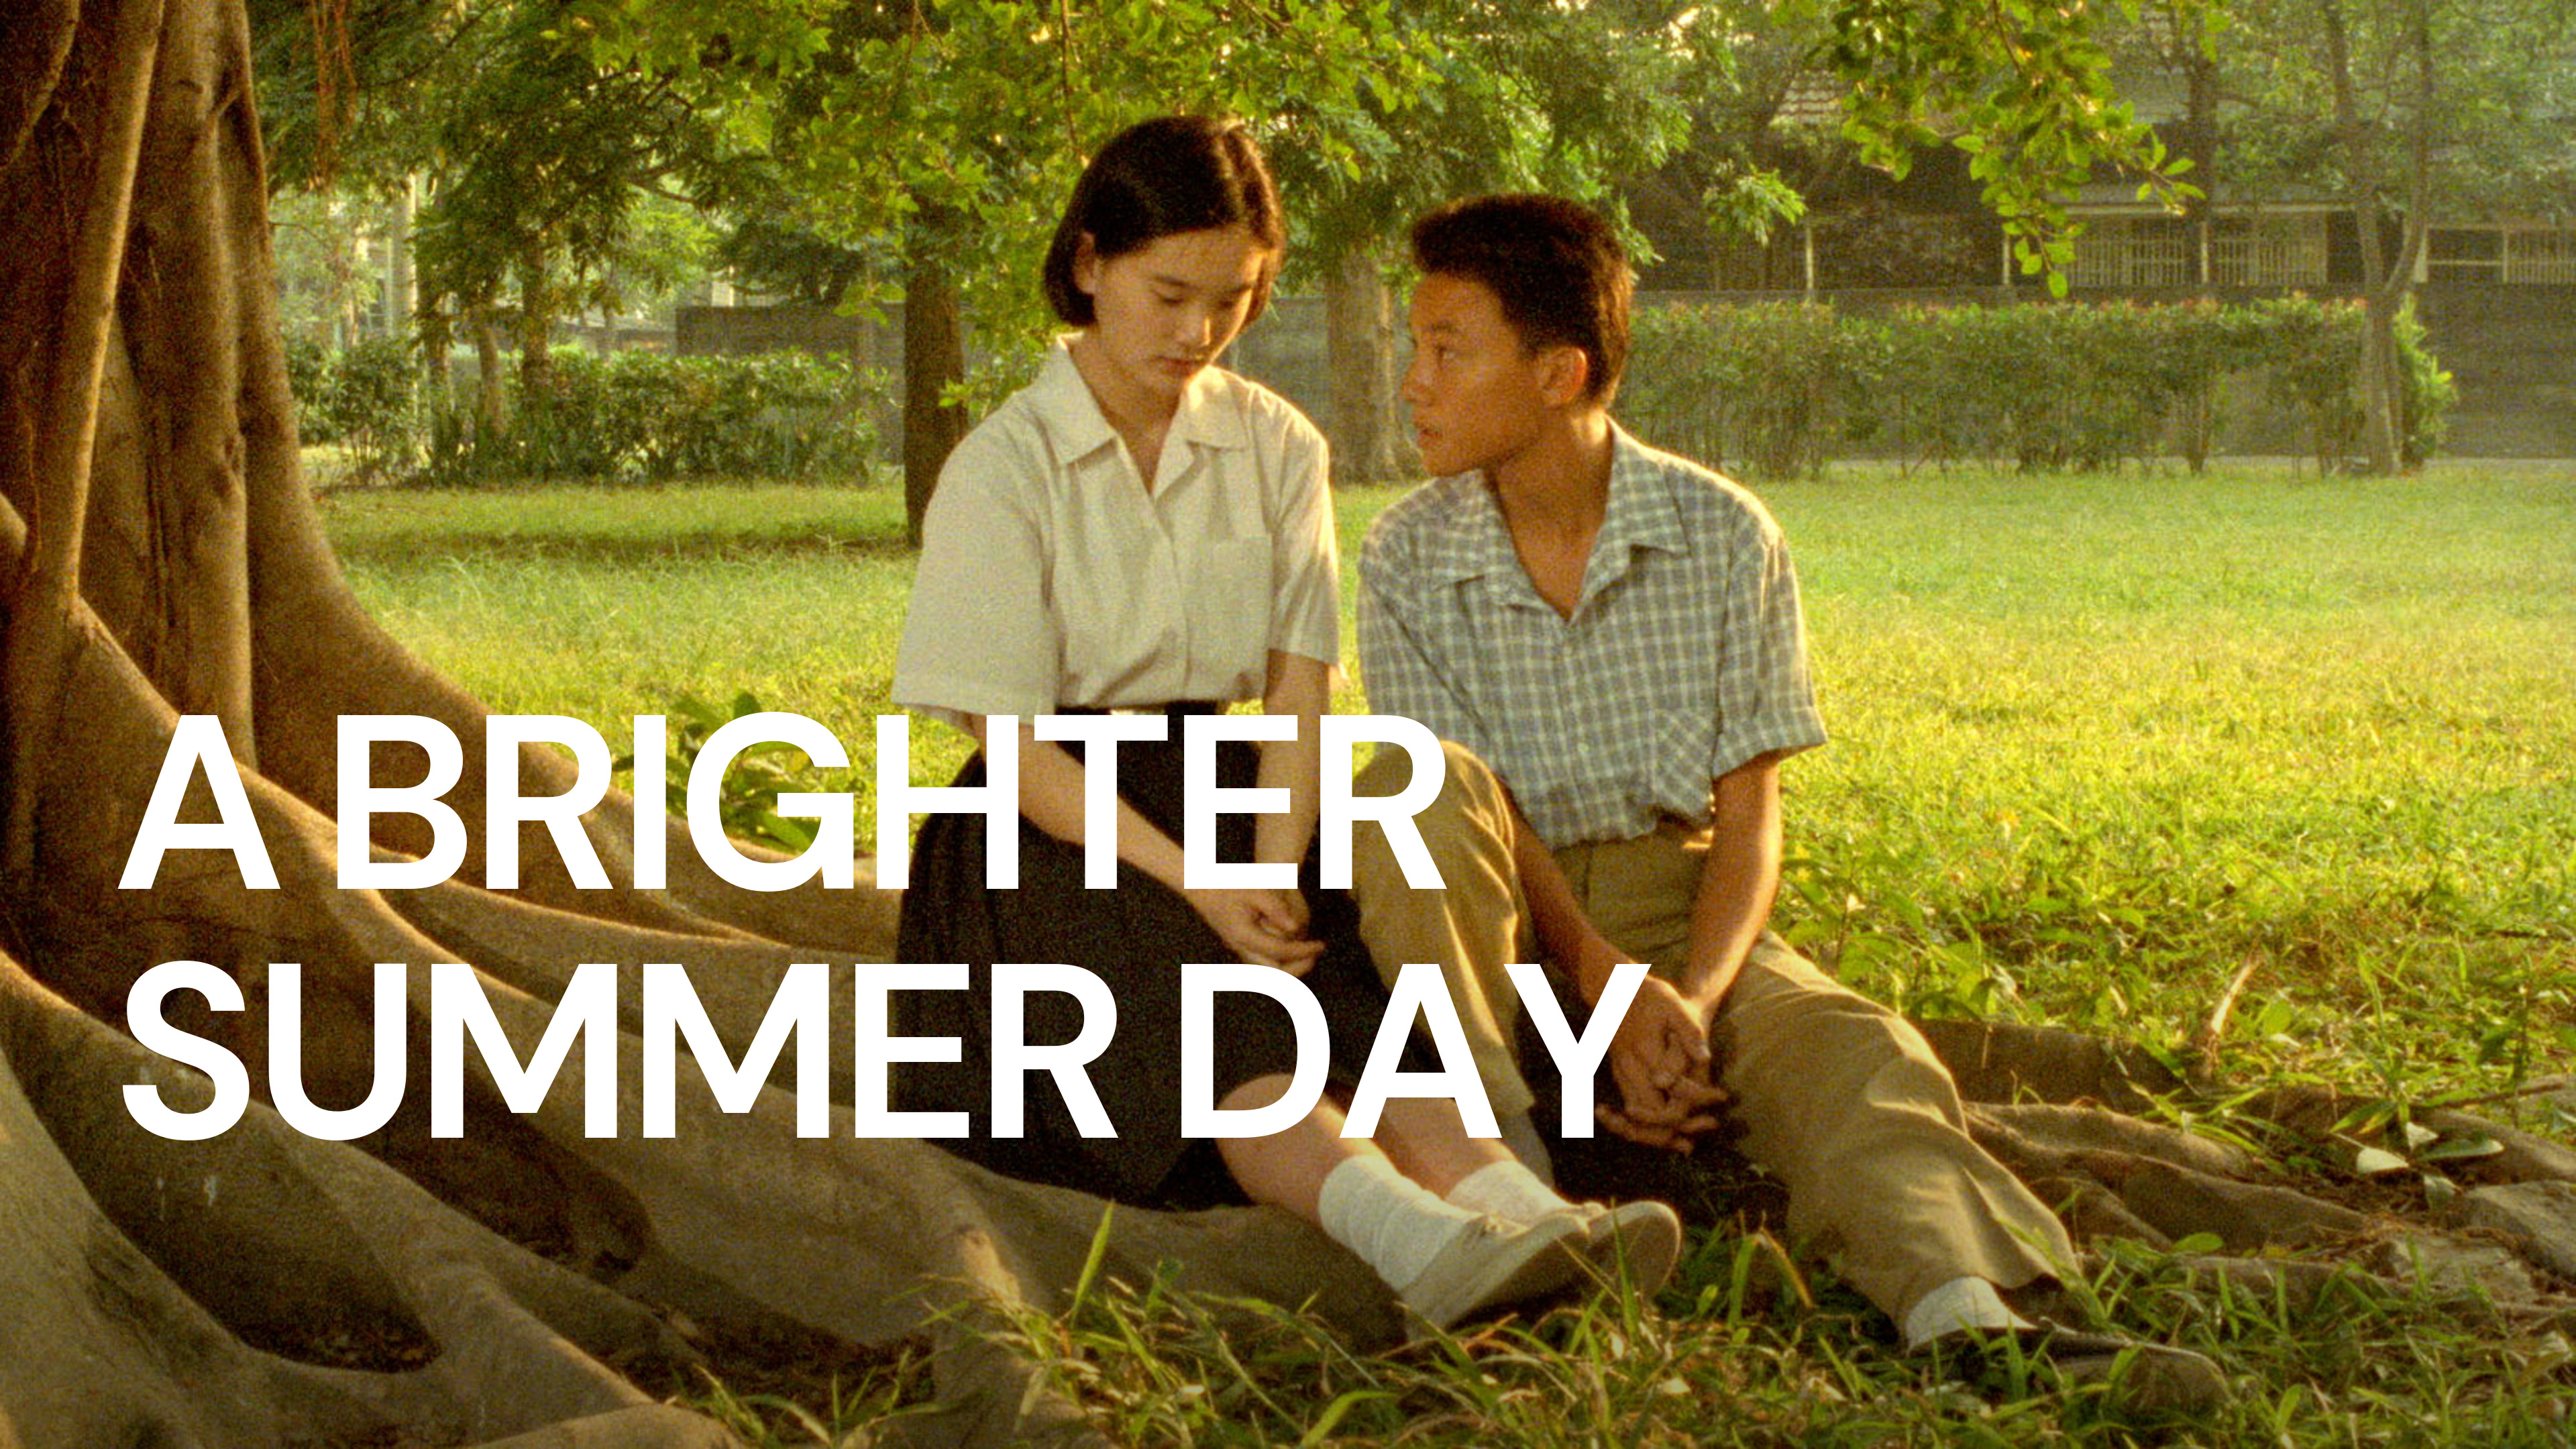 46-facts-about-the-movie-a-brighter-summer-day